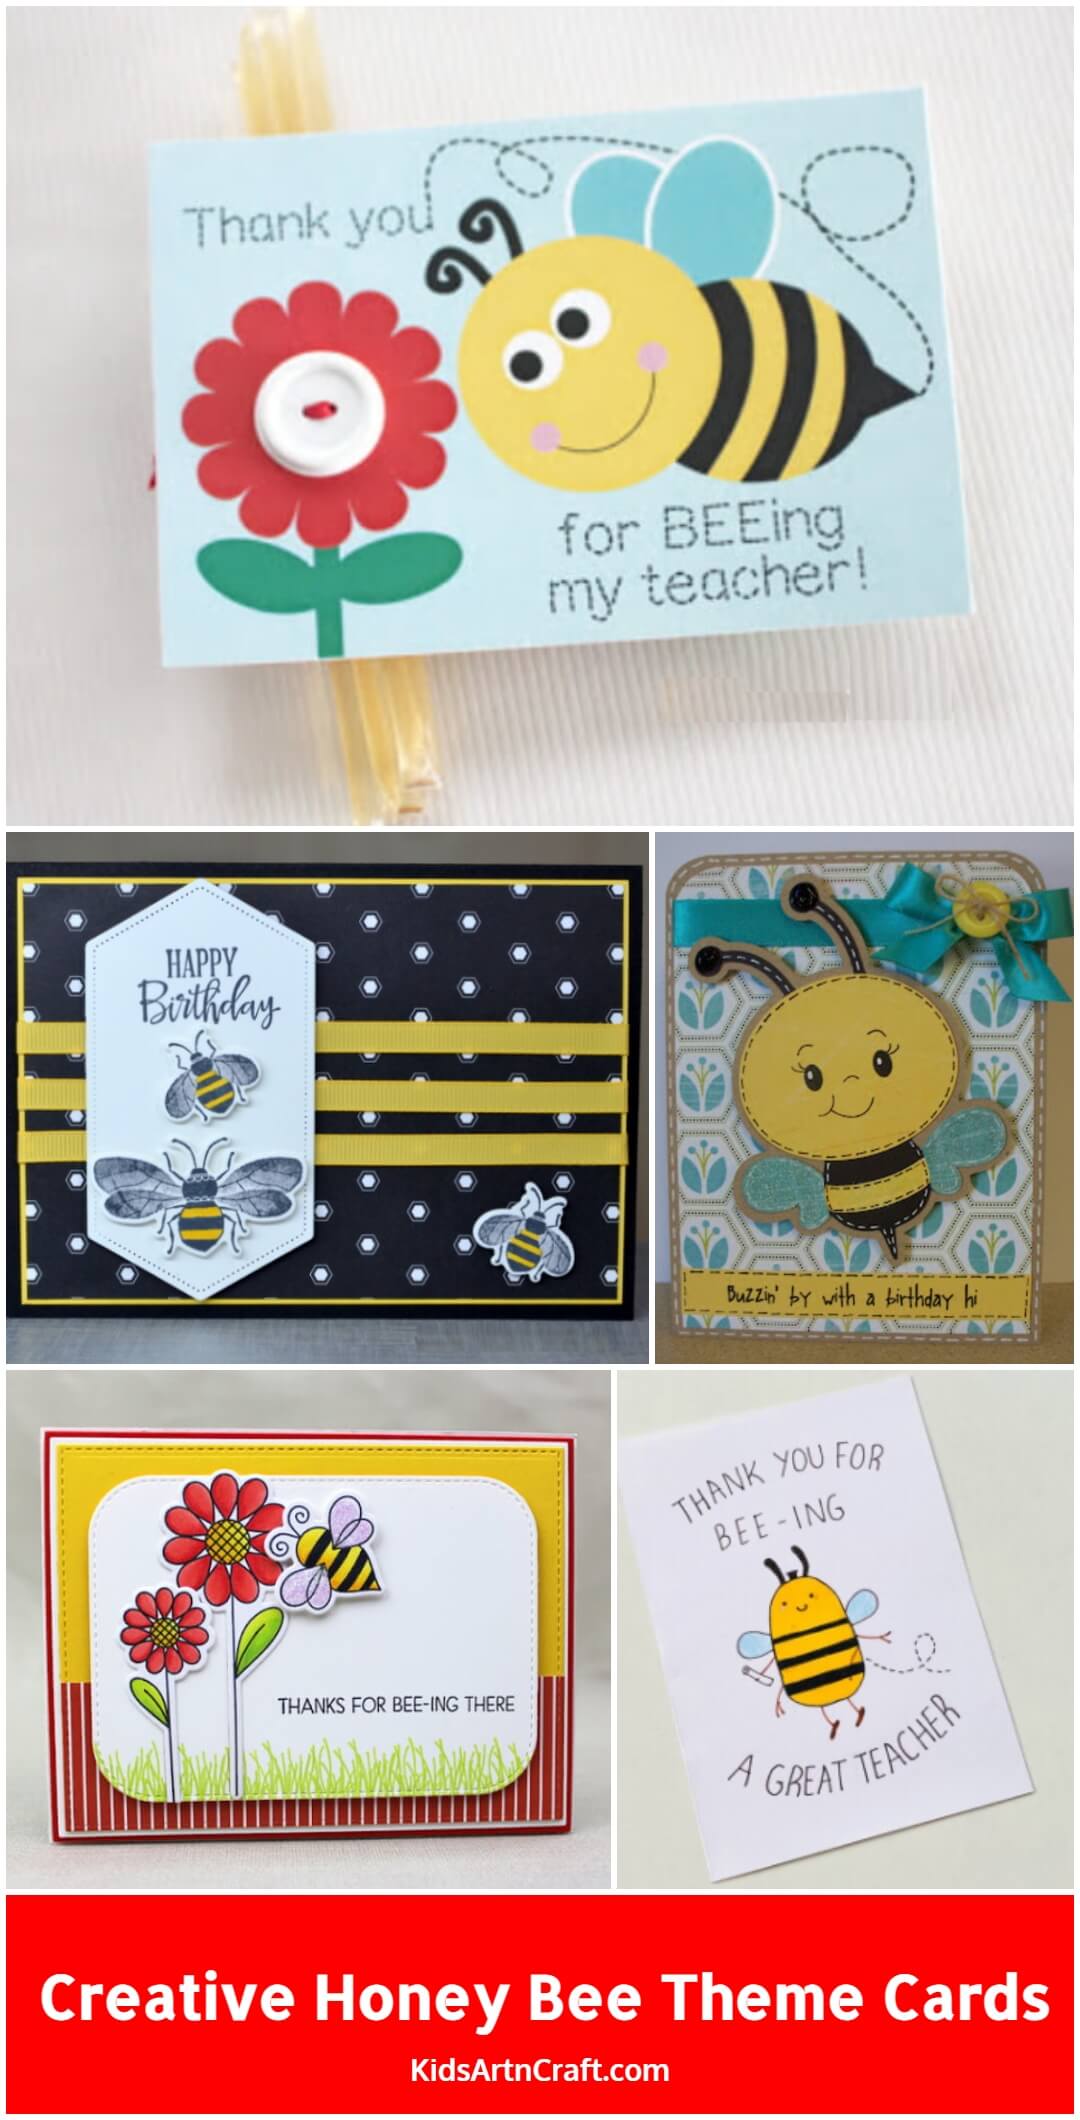 Easy Honey Bee Theme Cards for Kids